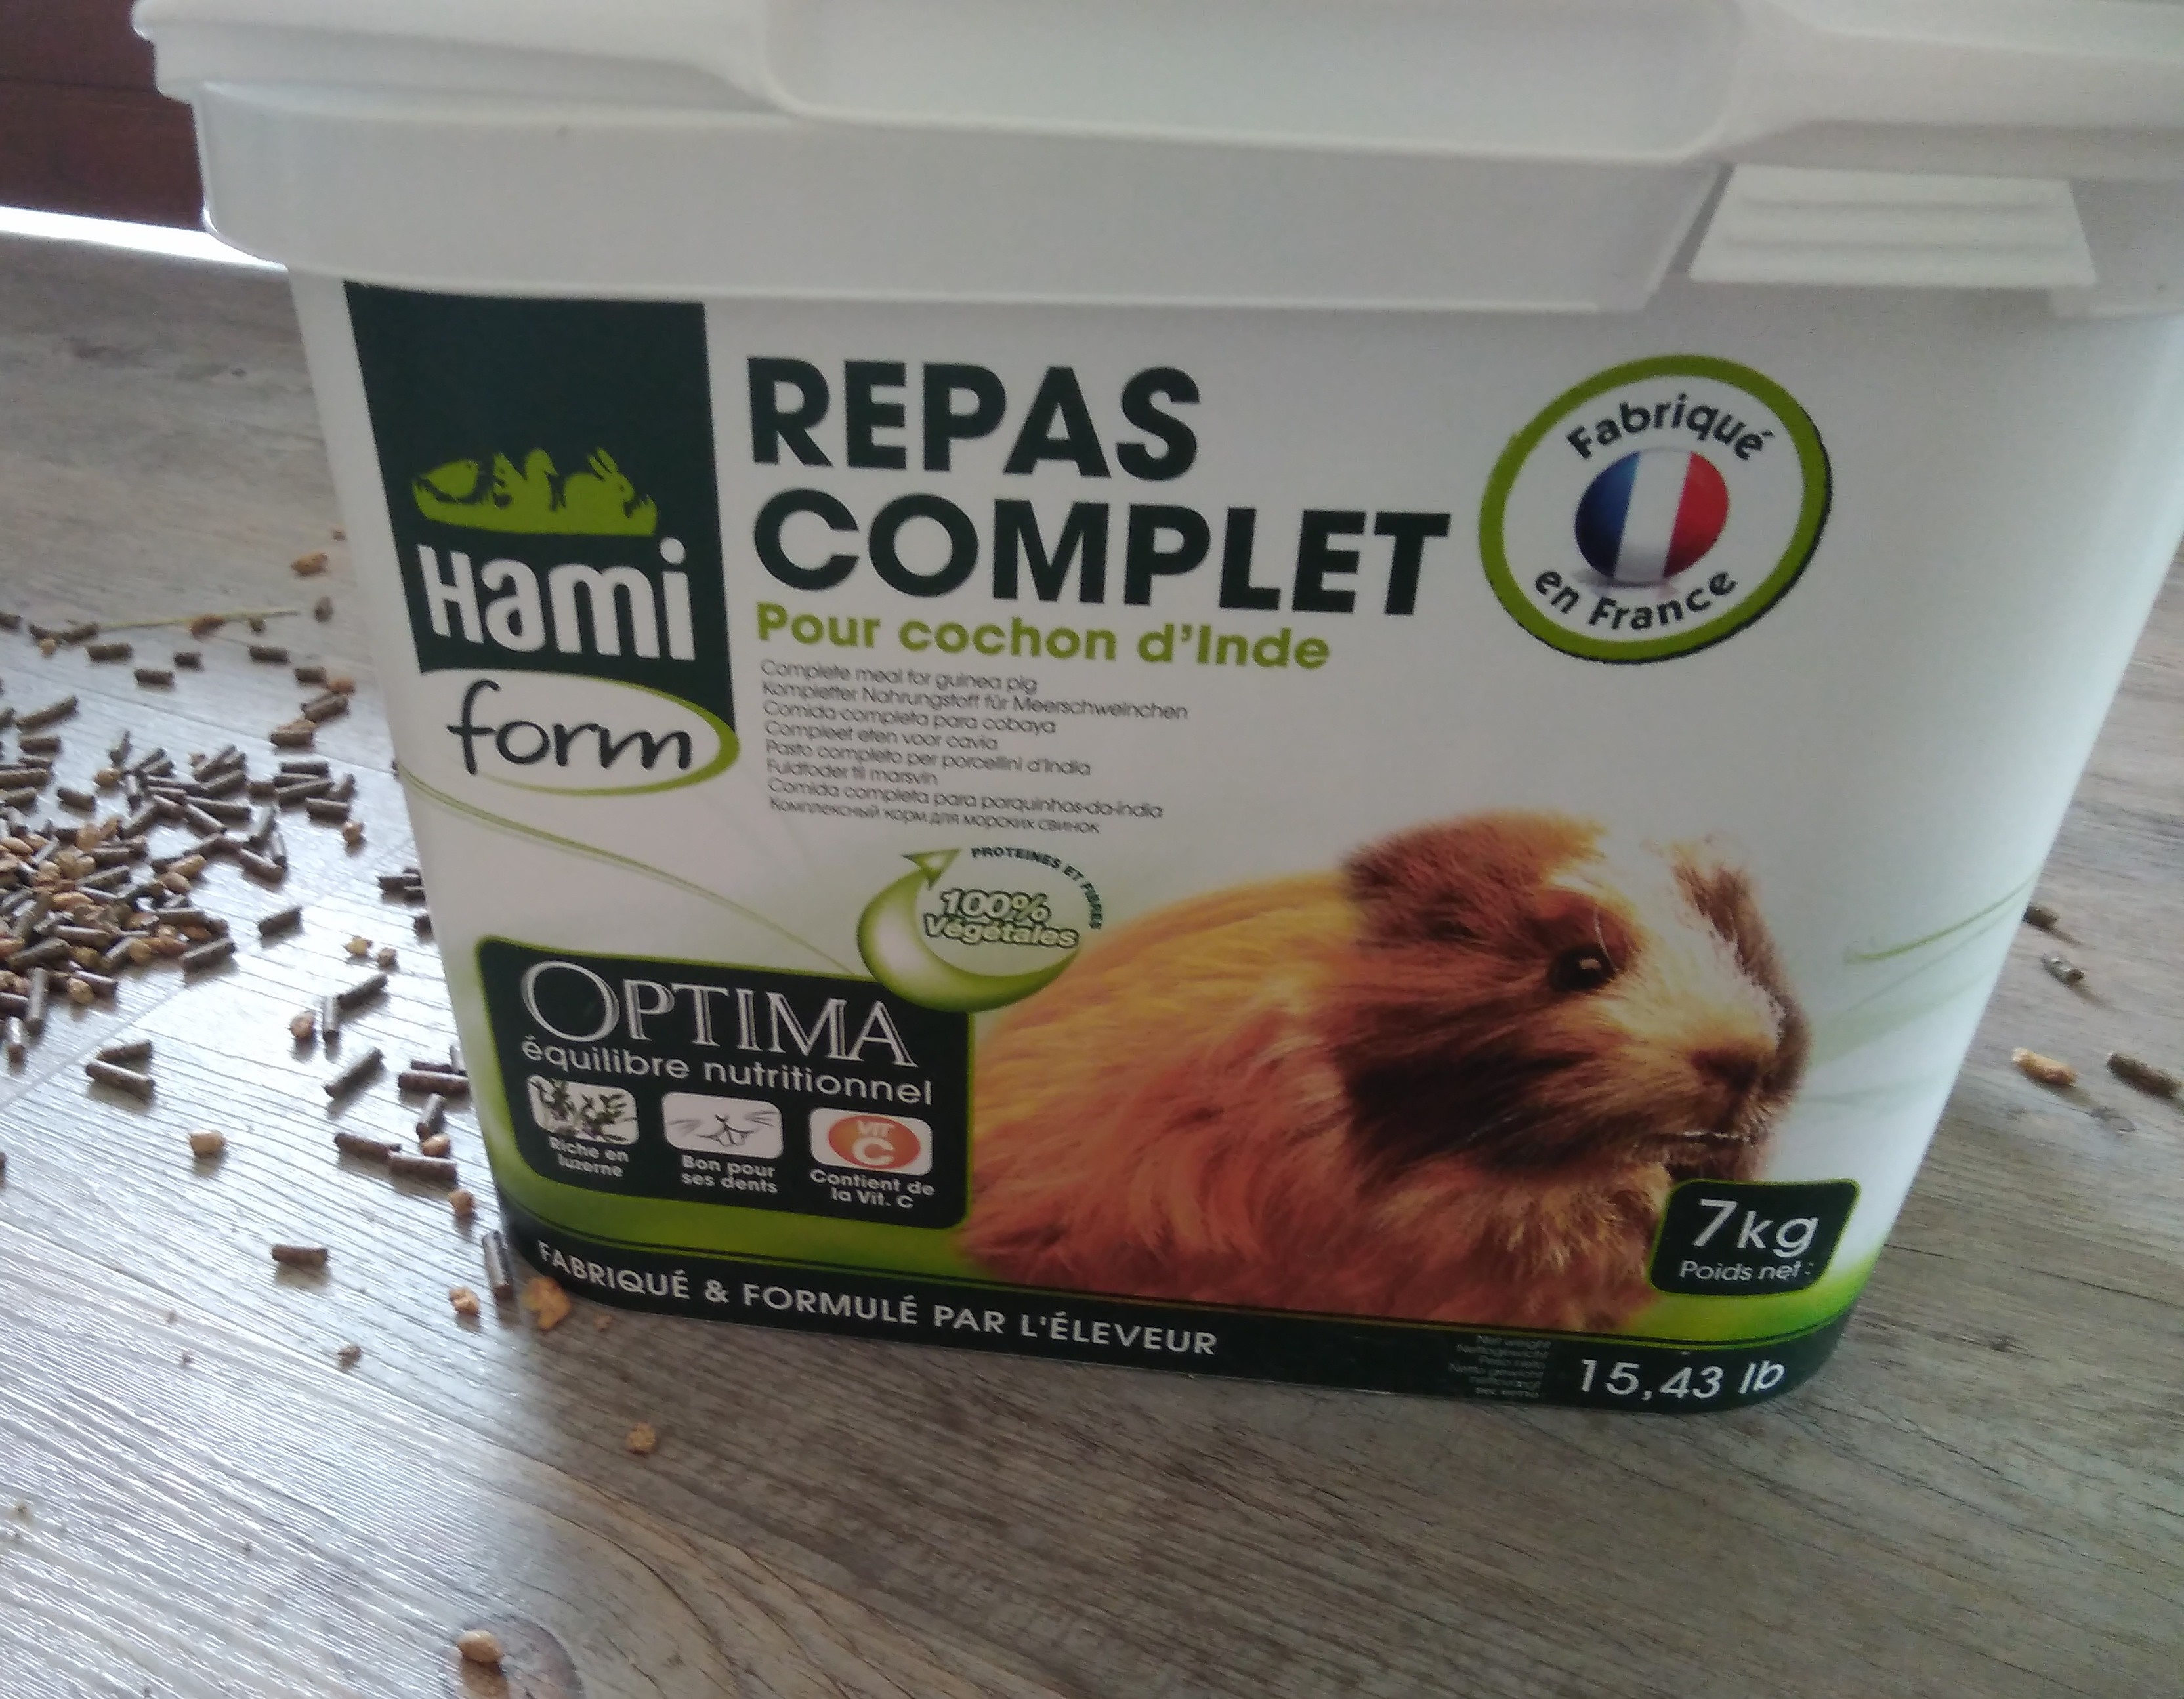 Repas complet - Product - fr